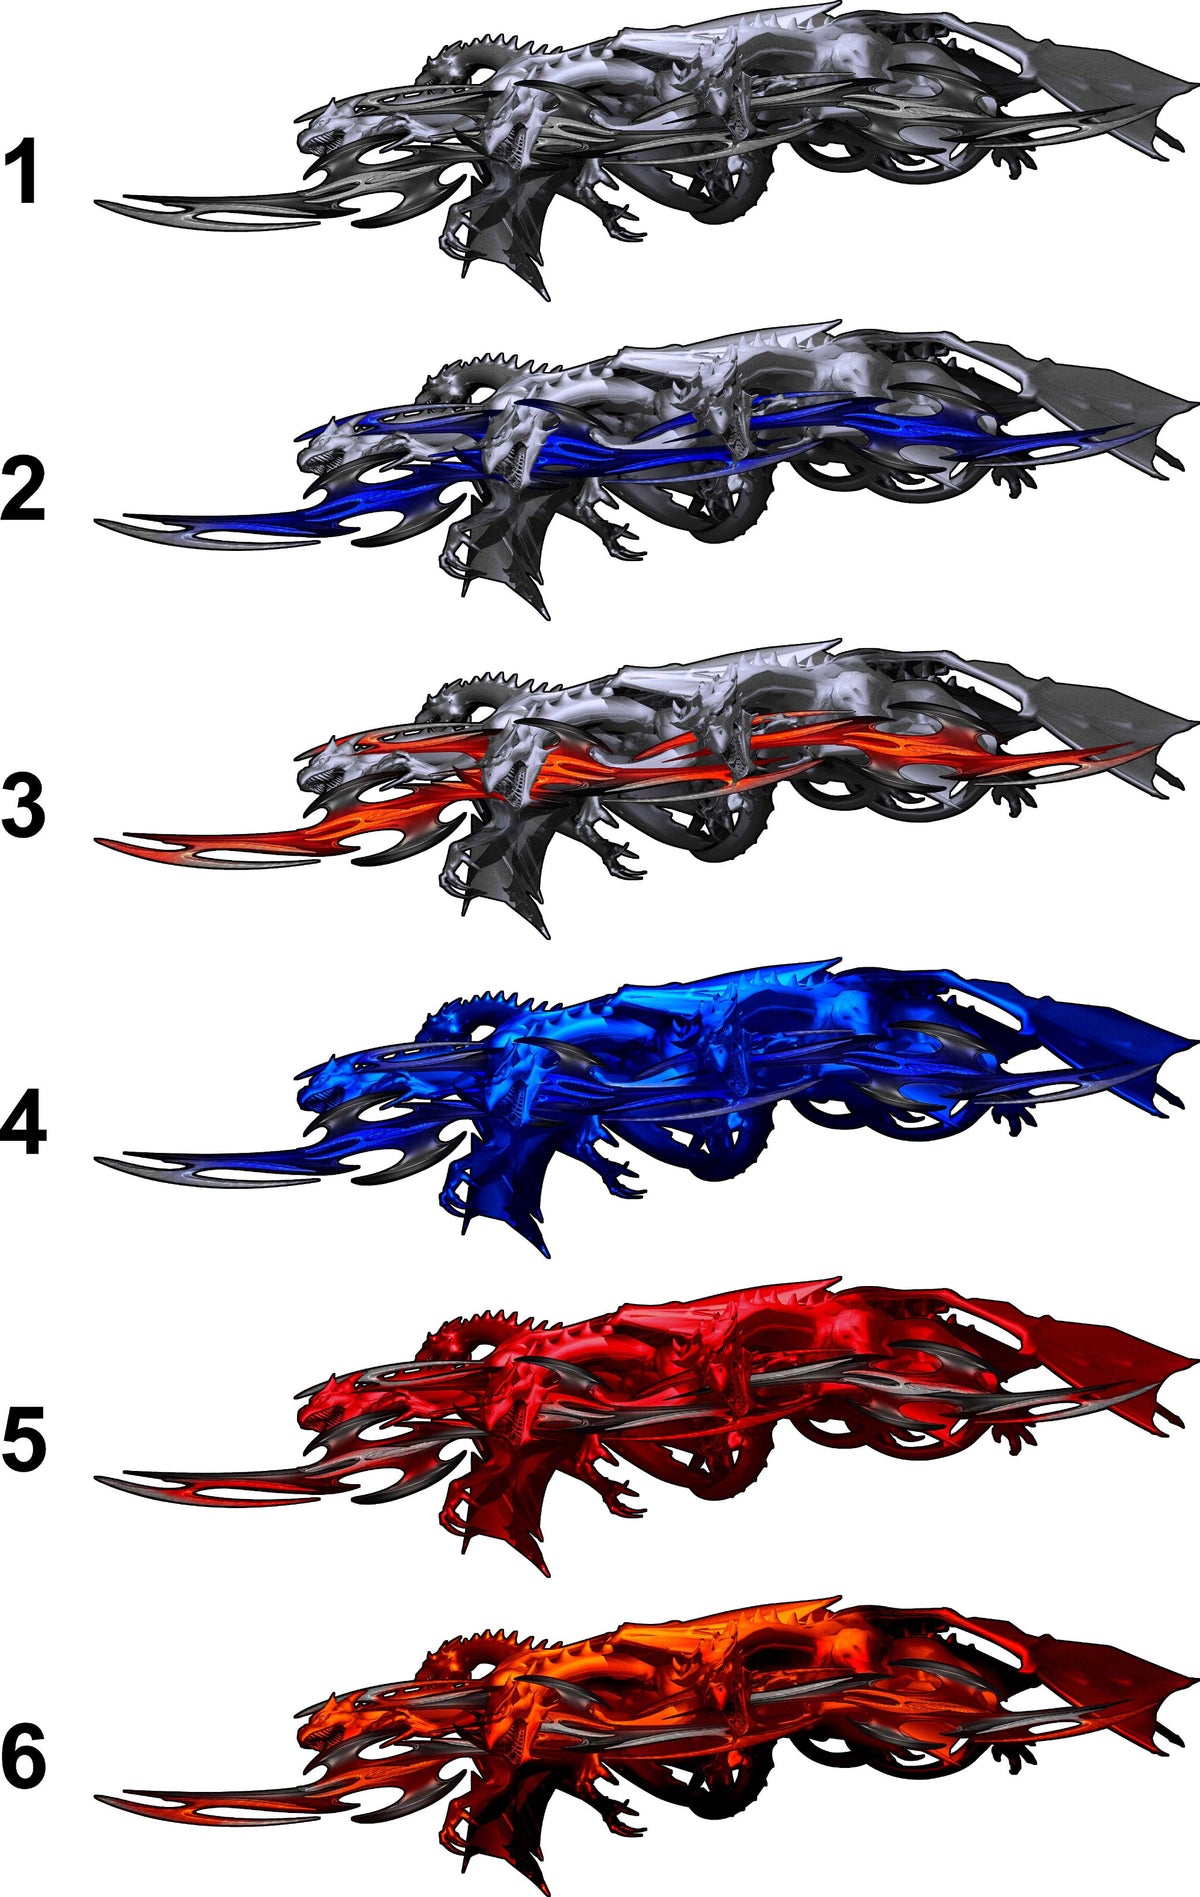 tribal dragons link vehicle decals kit available styles 1-6